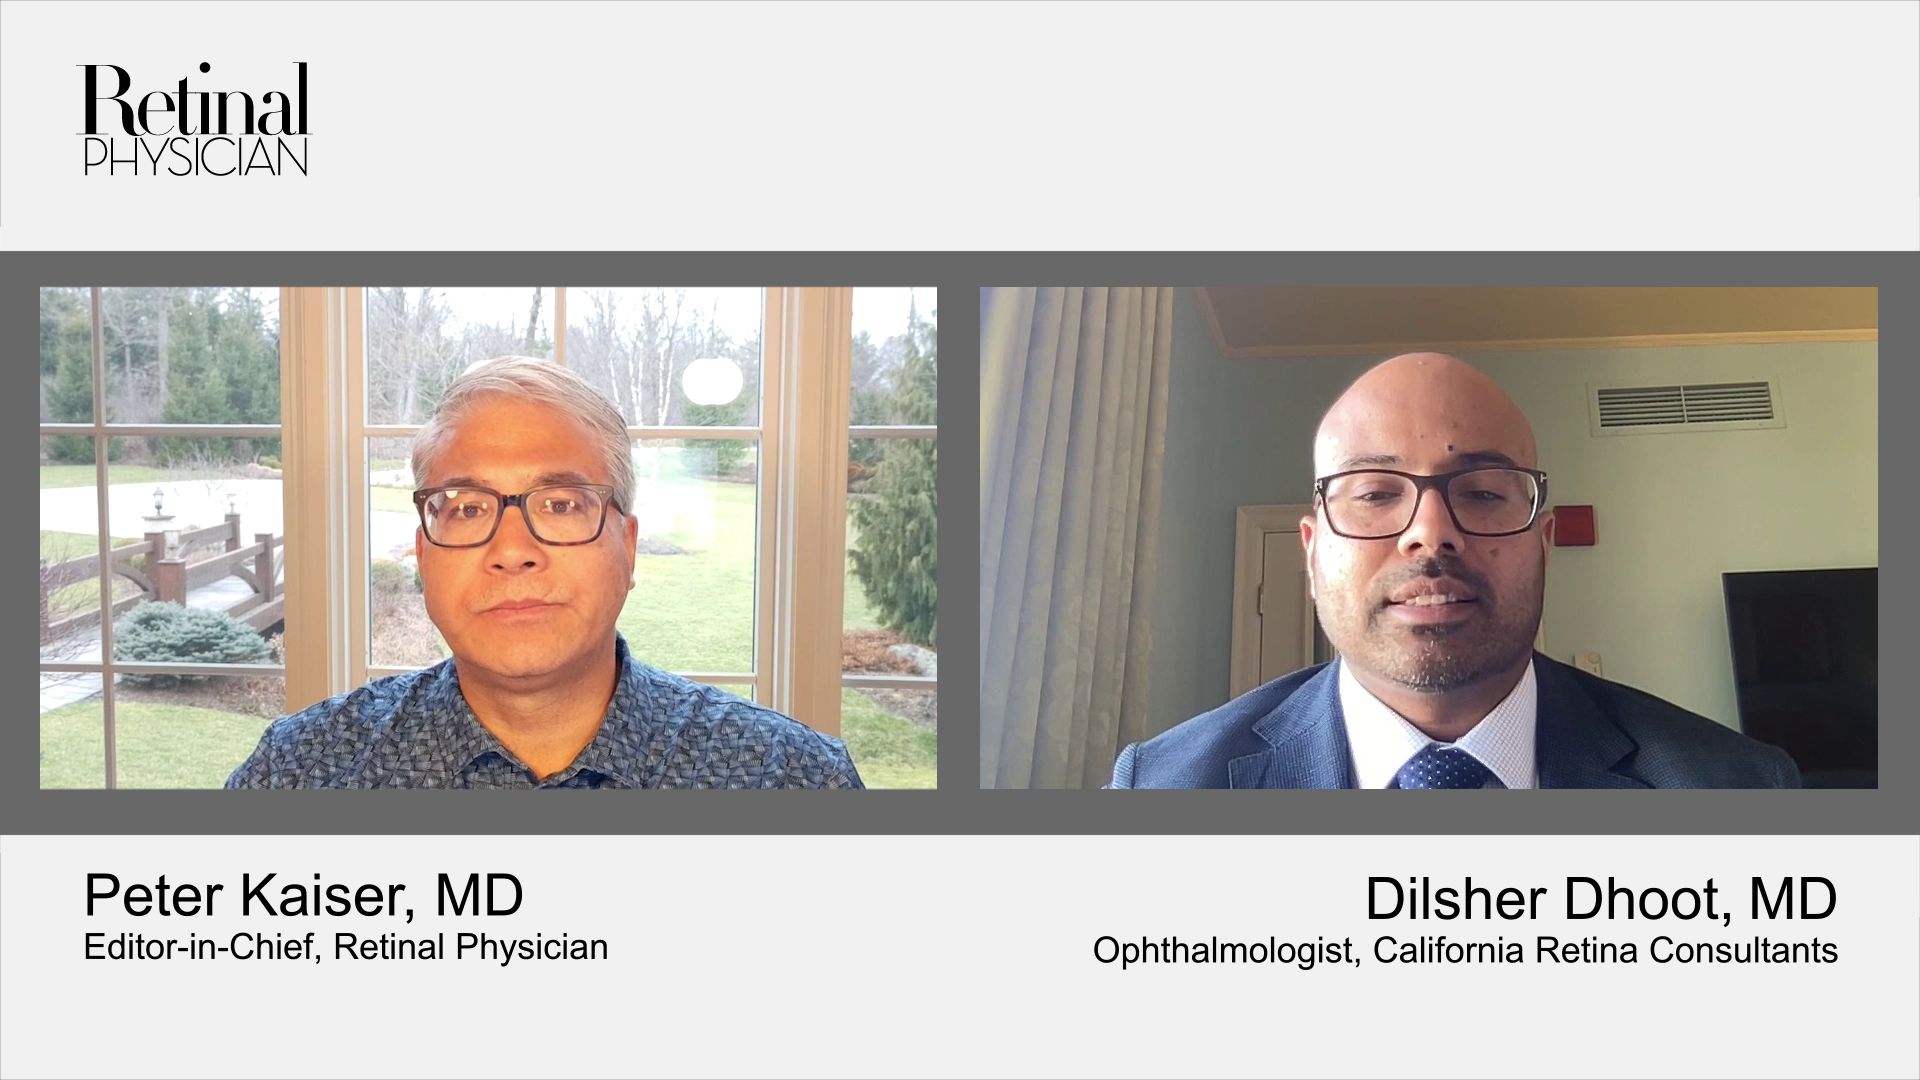 Peter Kaiser, MD, and Dilsher Dhoot, MD, discuss incorporating medications into treatment for macular degeneration.